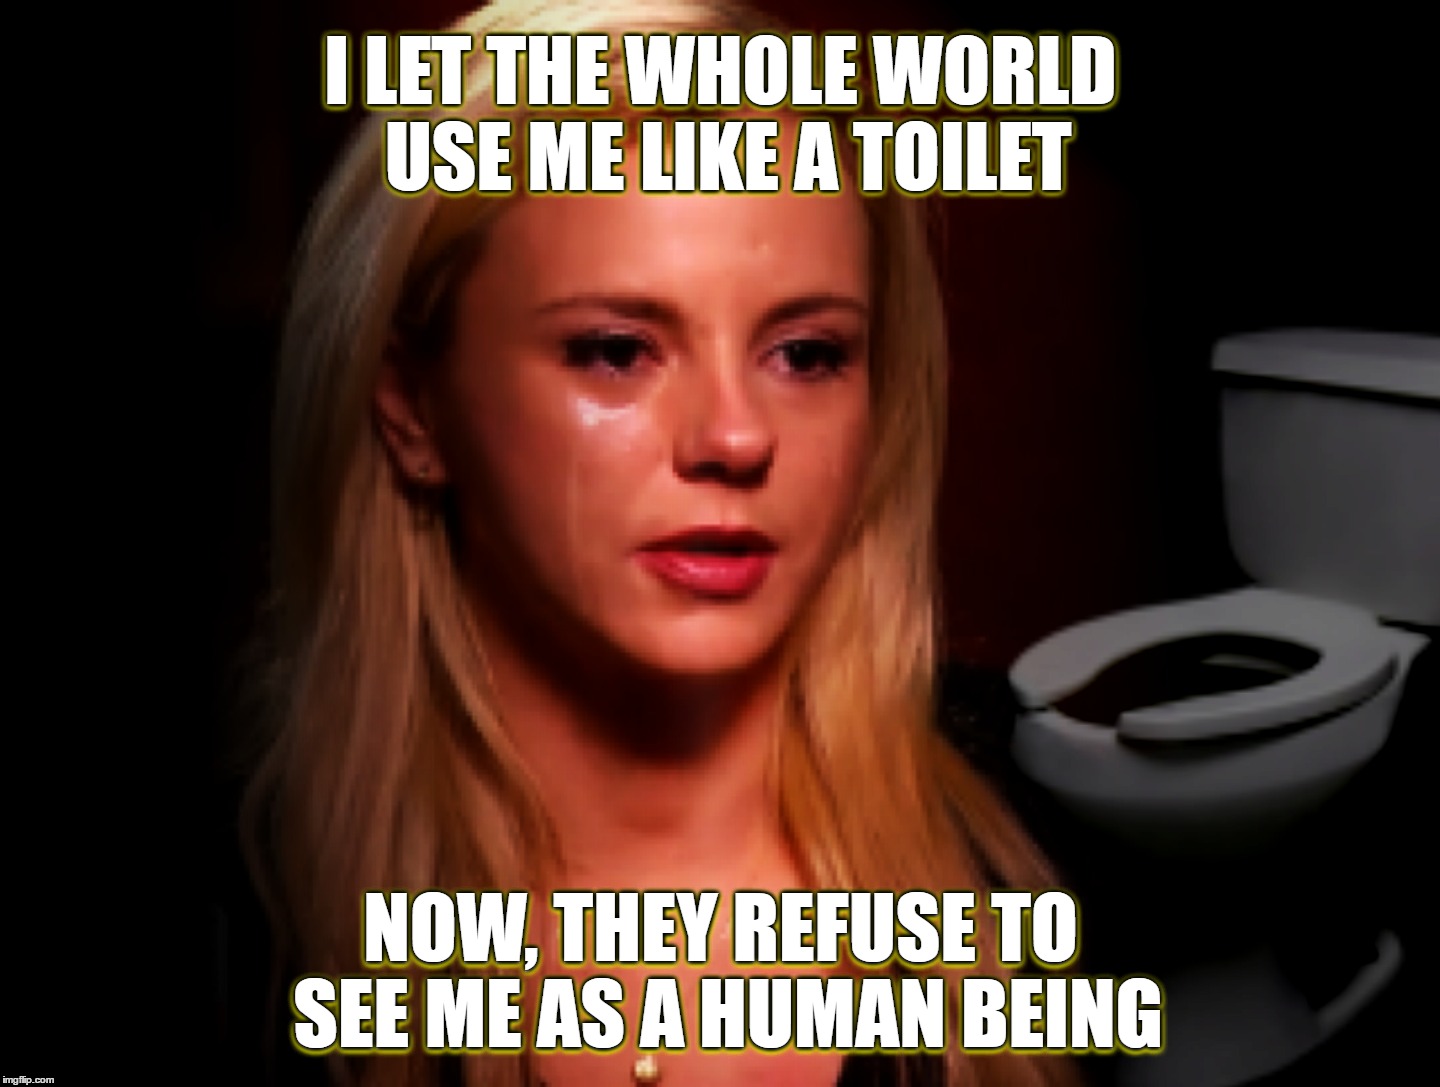 Poor Sad Bree Olson | I LET THE WHOLE WORLD USE ME LIKE A TOILET; I LET THE WHOLE WORLD USE ME LIKE A TOILET; NOW, THEY REFUSE TO SEE ME AS A HUMAN BEING; NOW, THEY REFUSE TO SEE ME AS A HUMAN BEING | image tagged in poor sad bree olson,woman crying,regrets,porn,slut,whore | made w/ Imgflip meme maker